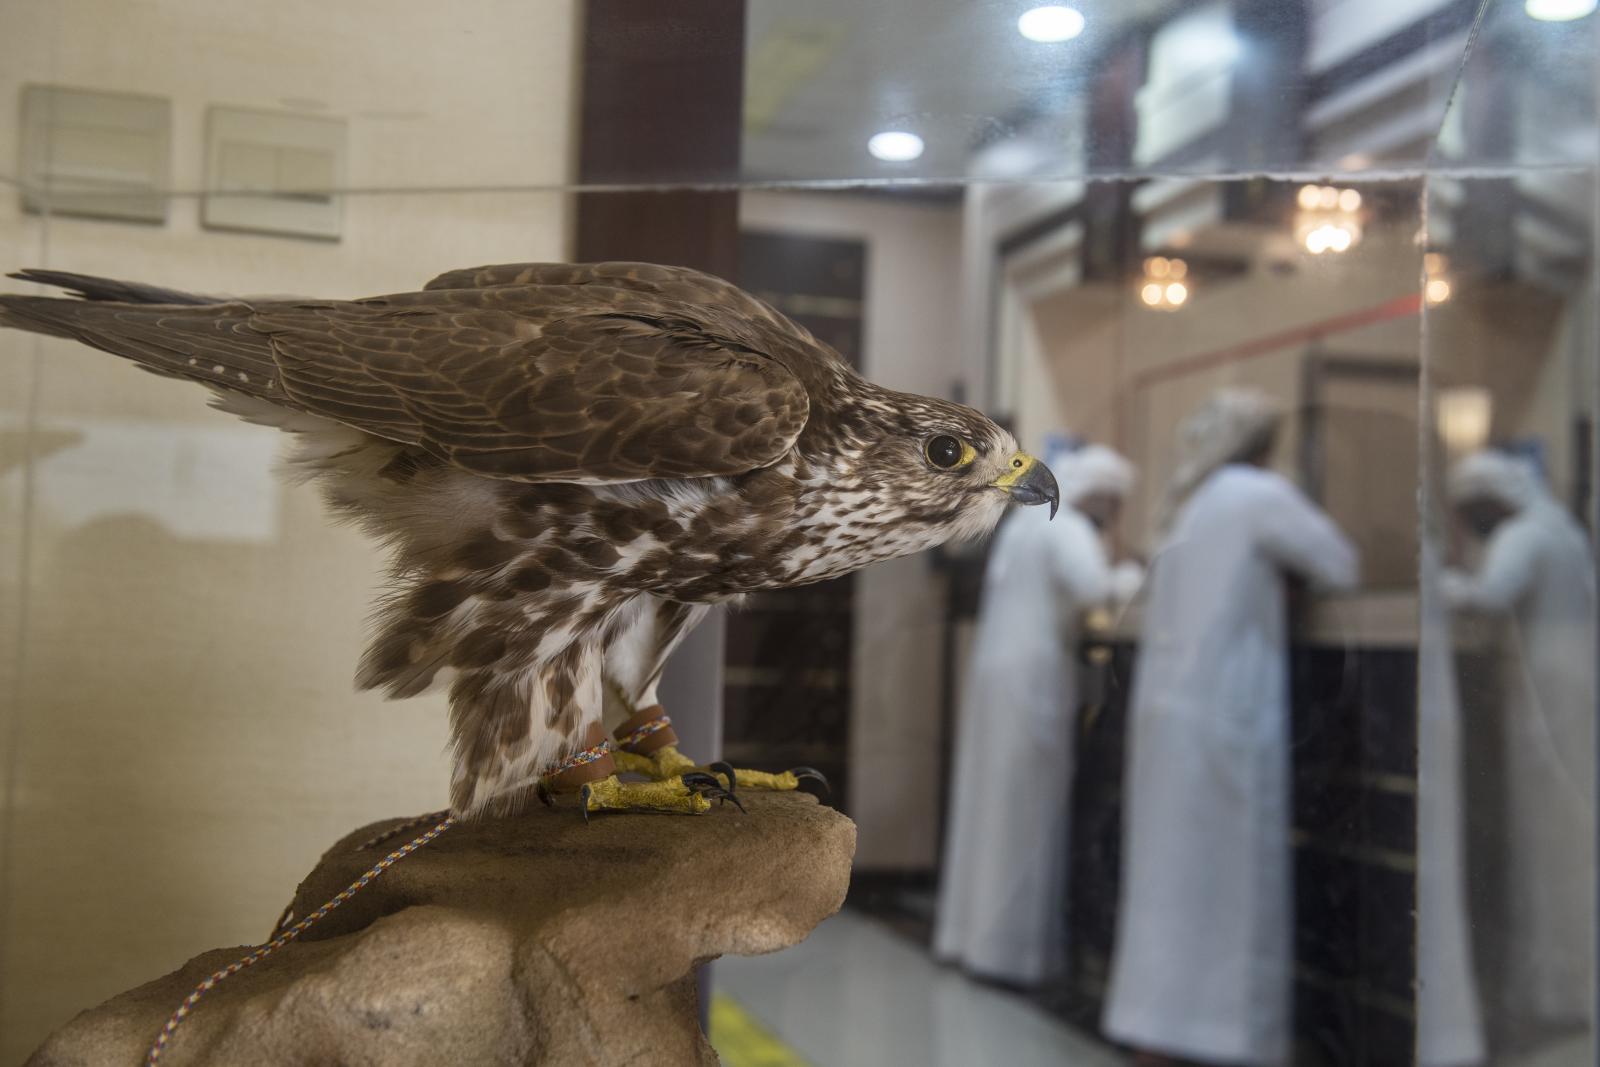 A visitor arrives at the Falcon...waits in the reception counter.